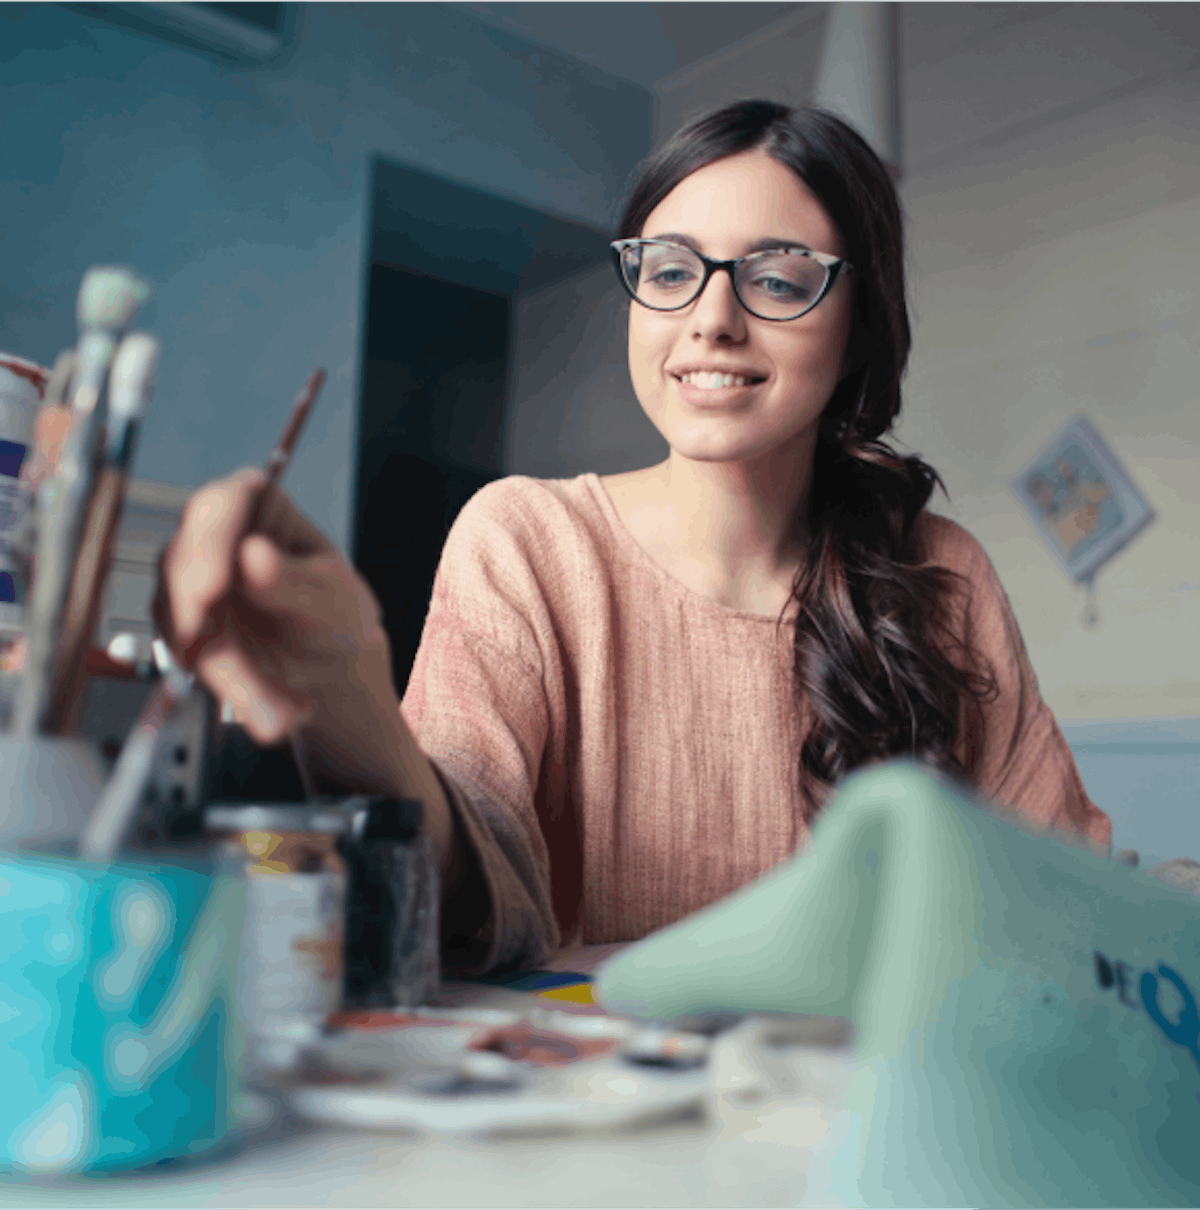 A smiling woman in glasses painting